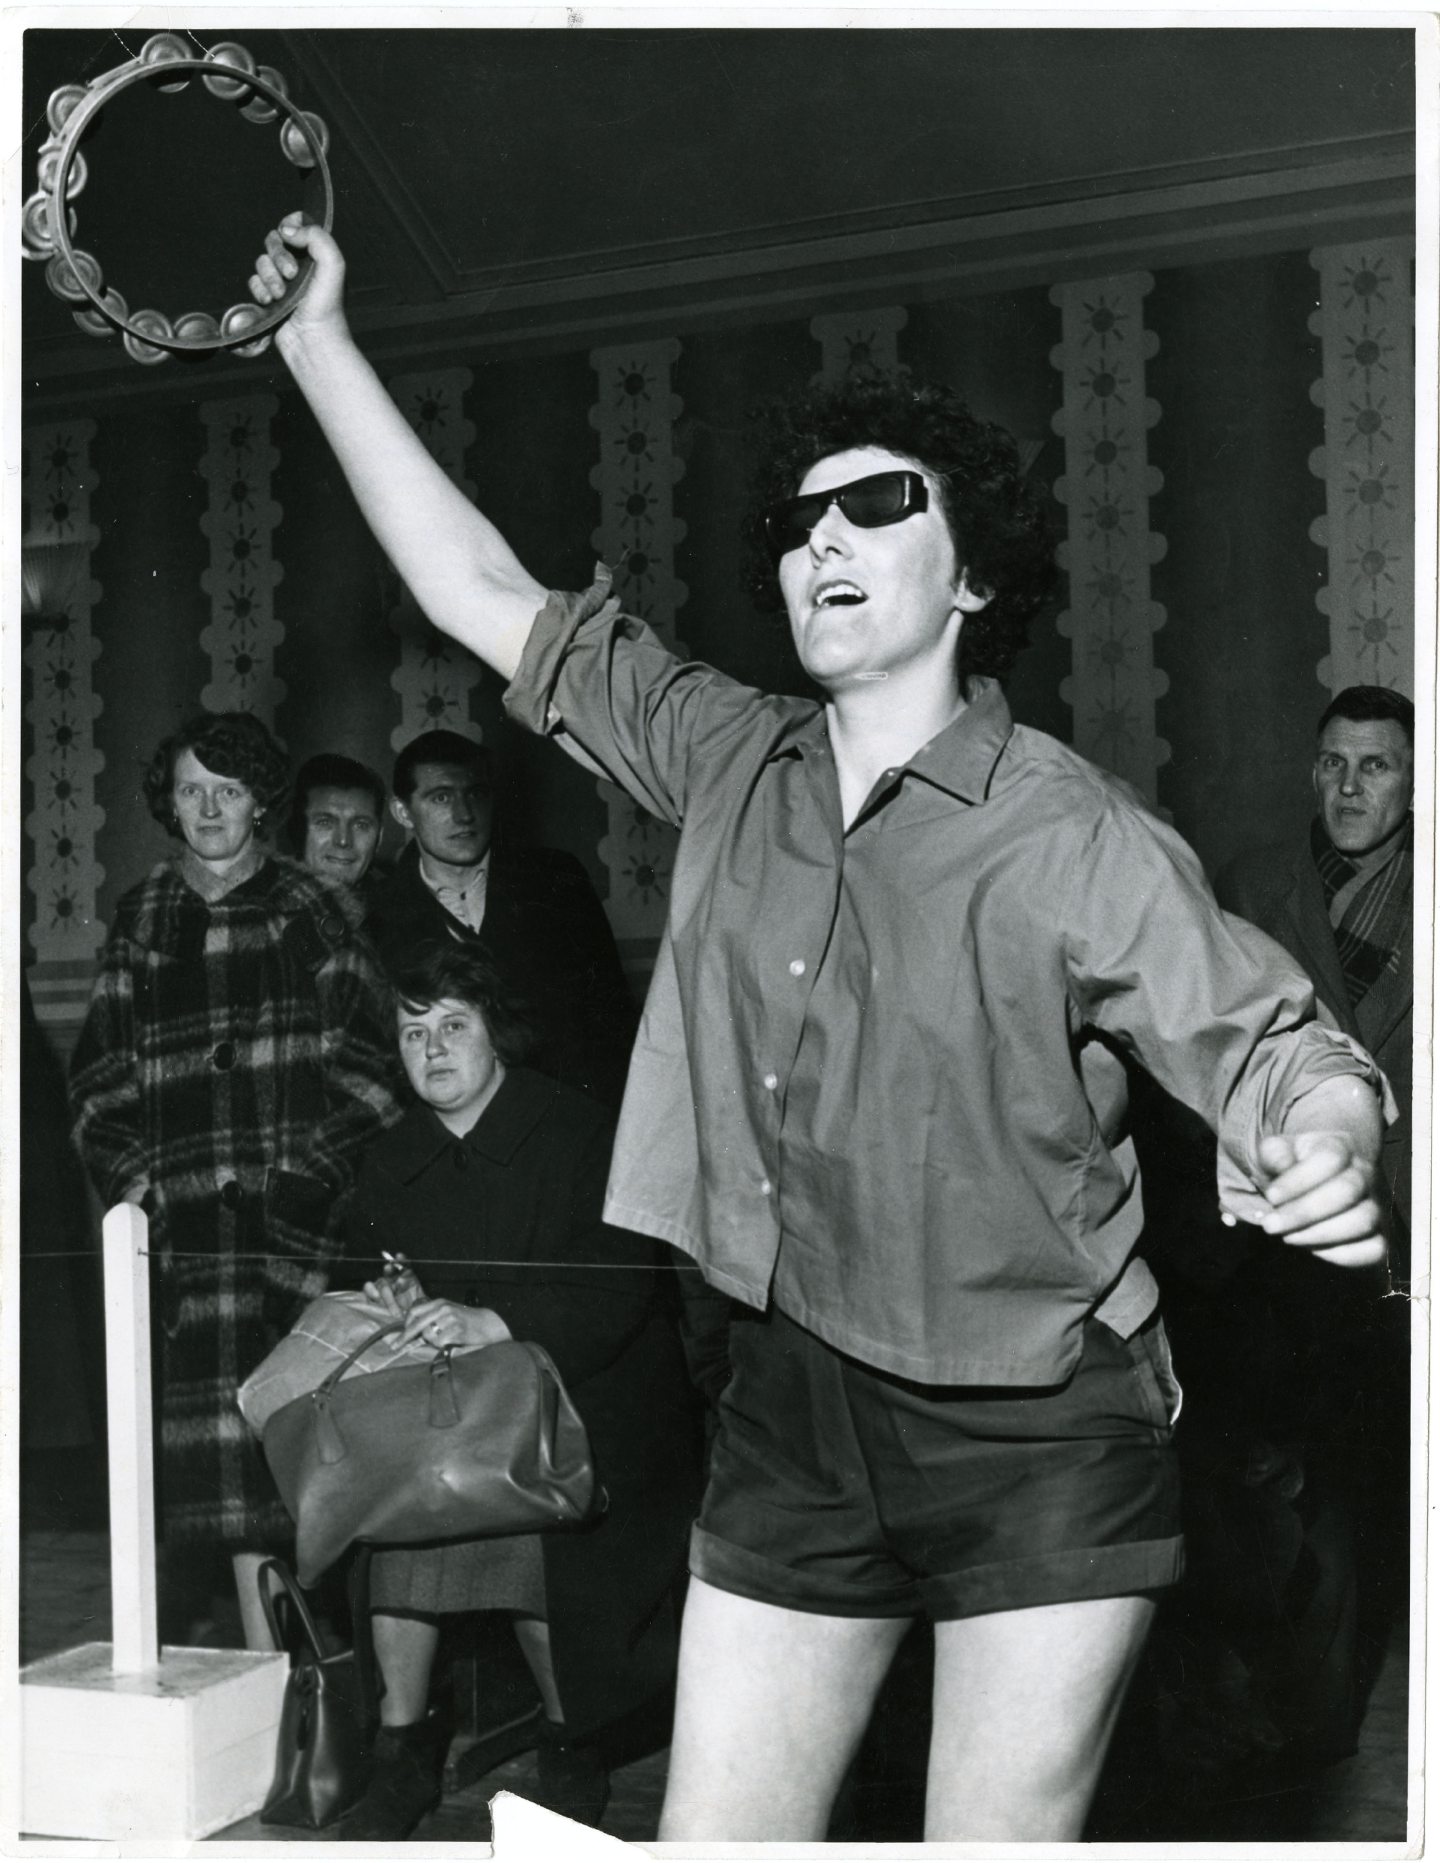 Cathie Connelly became a world champion in 1964.